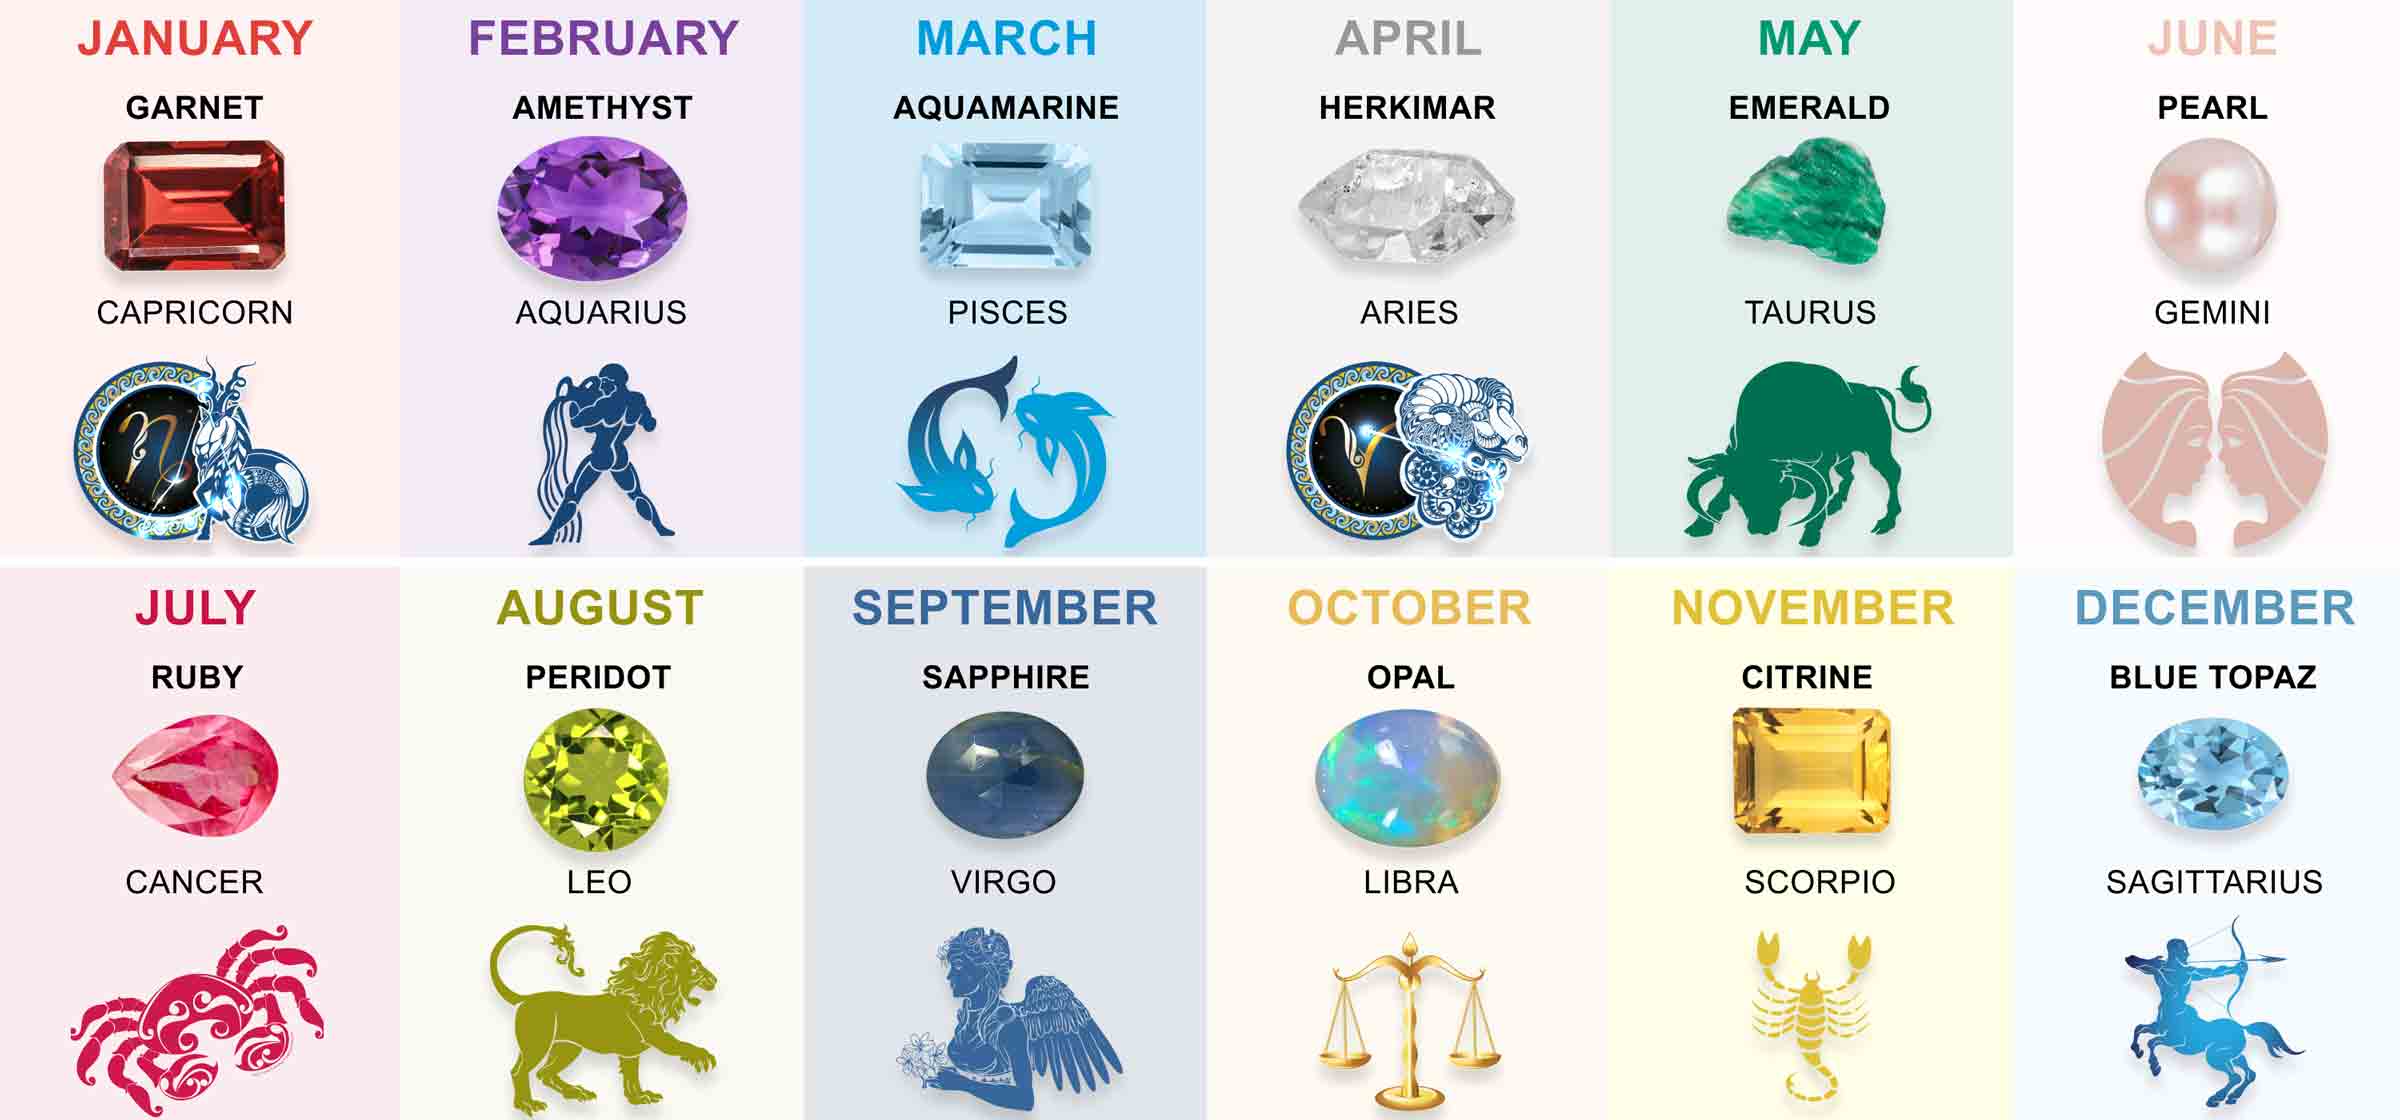 know-your-birthstone-according-to-your-zodiac-sign